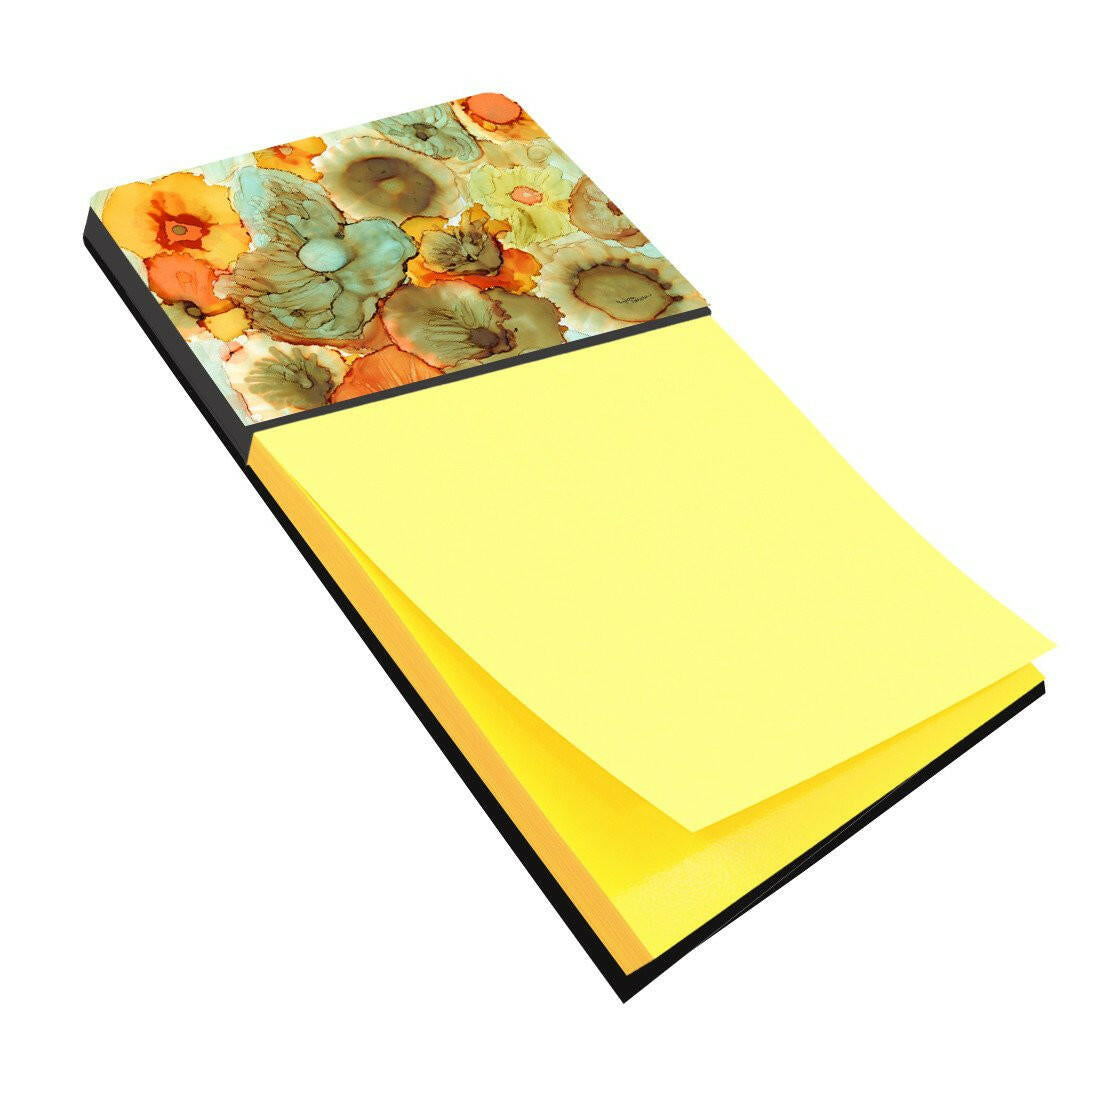 Abstract Flowers Teal and Orange Sticky Note Holder 8969SN by Caroline's Treasures